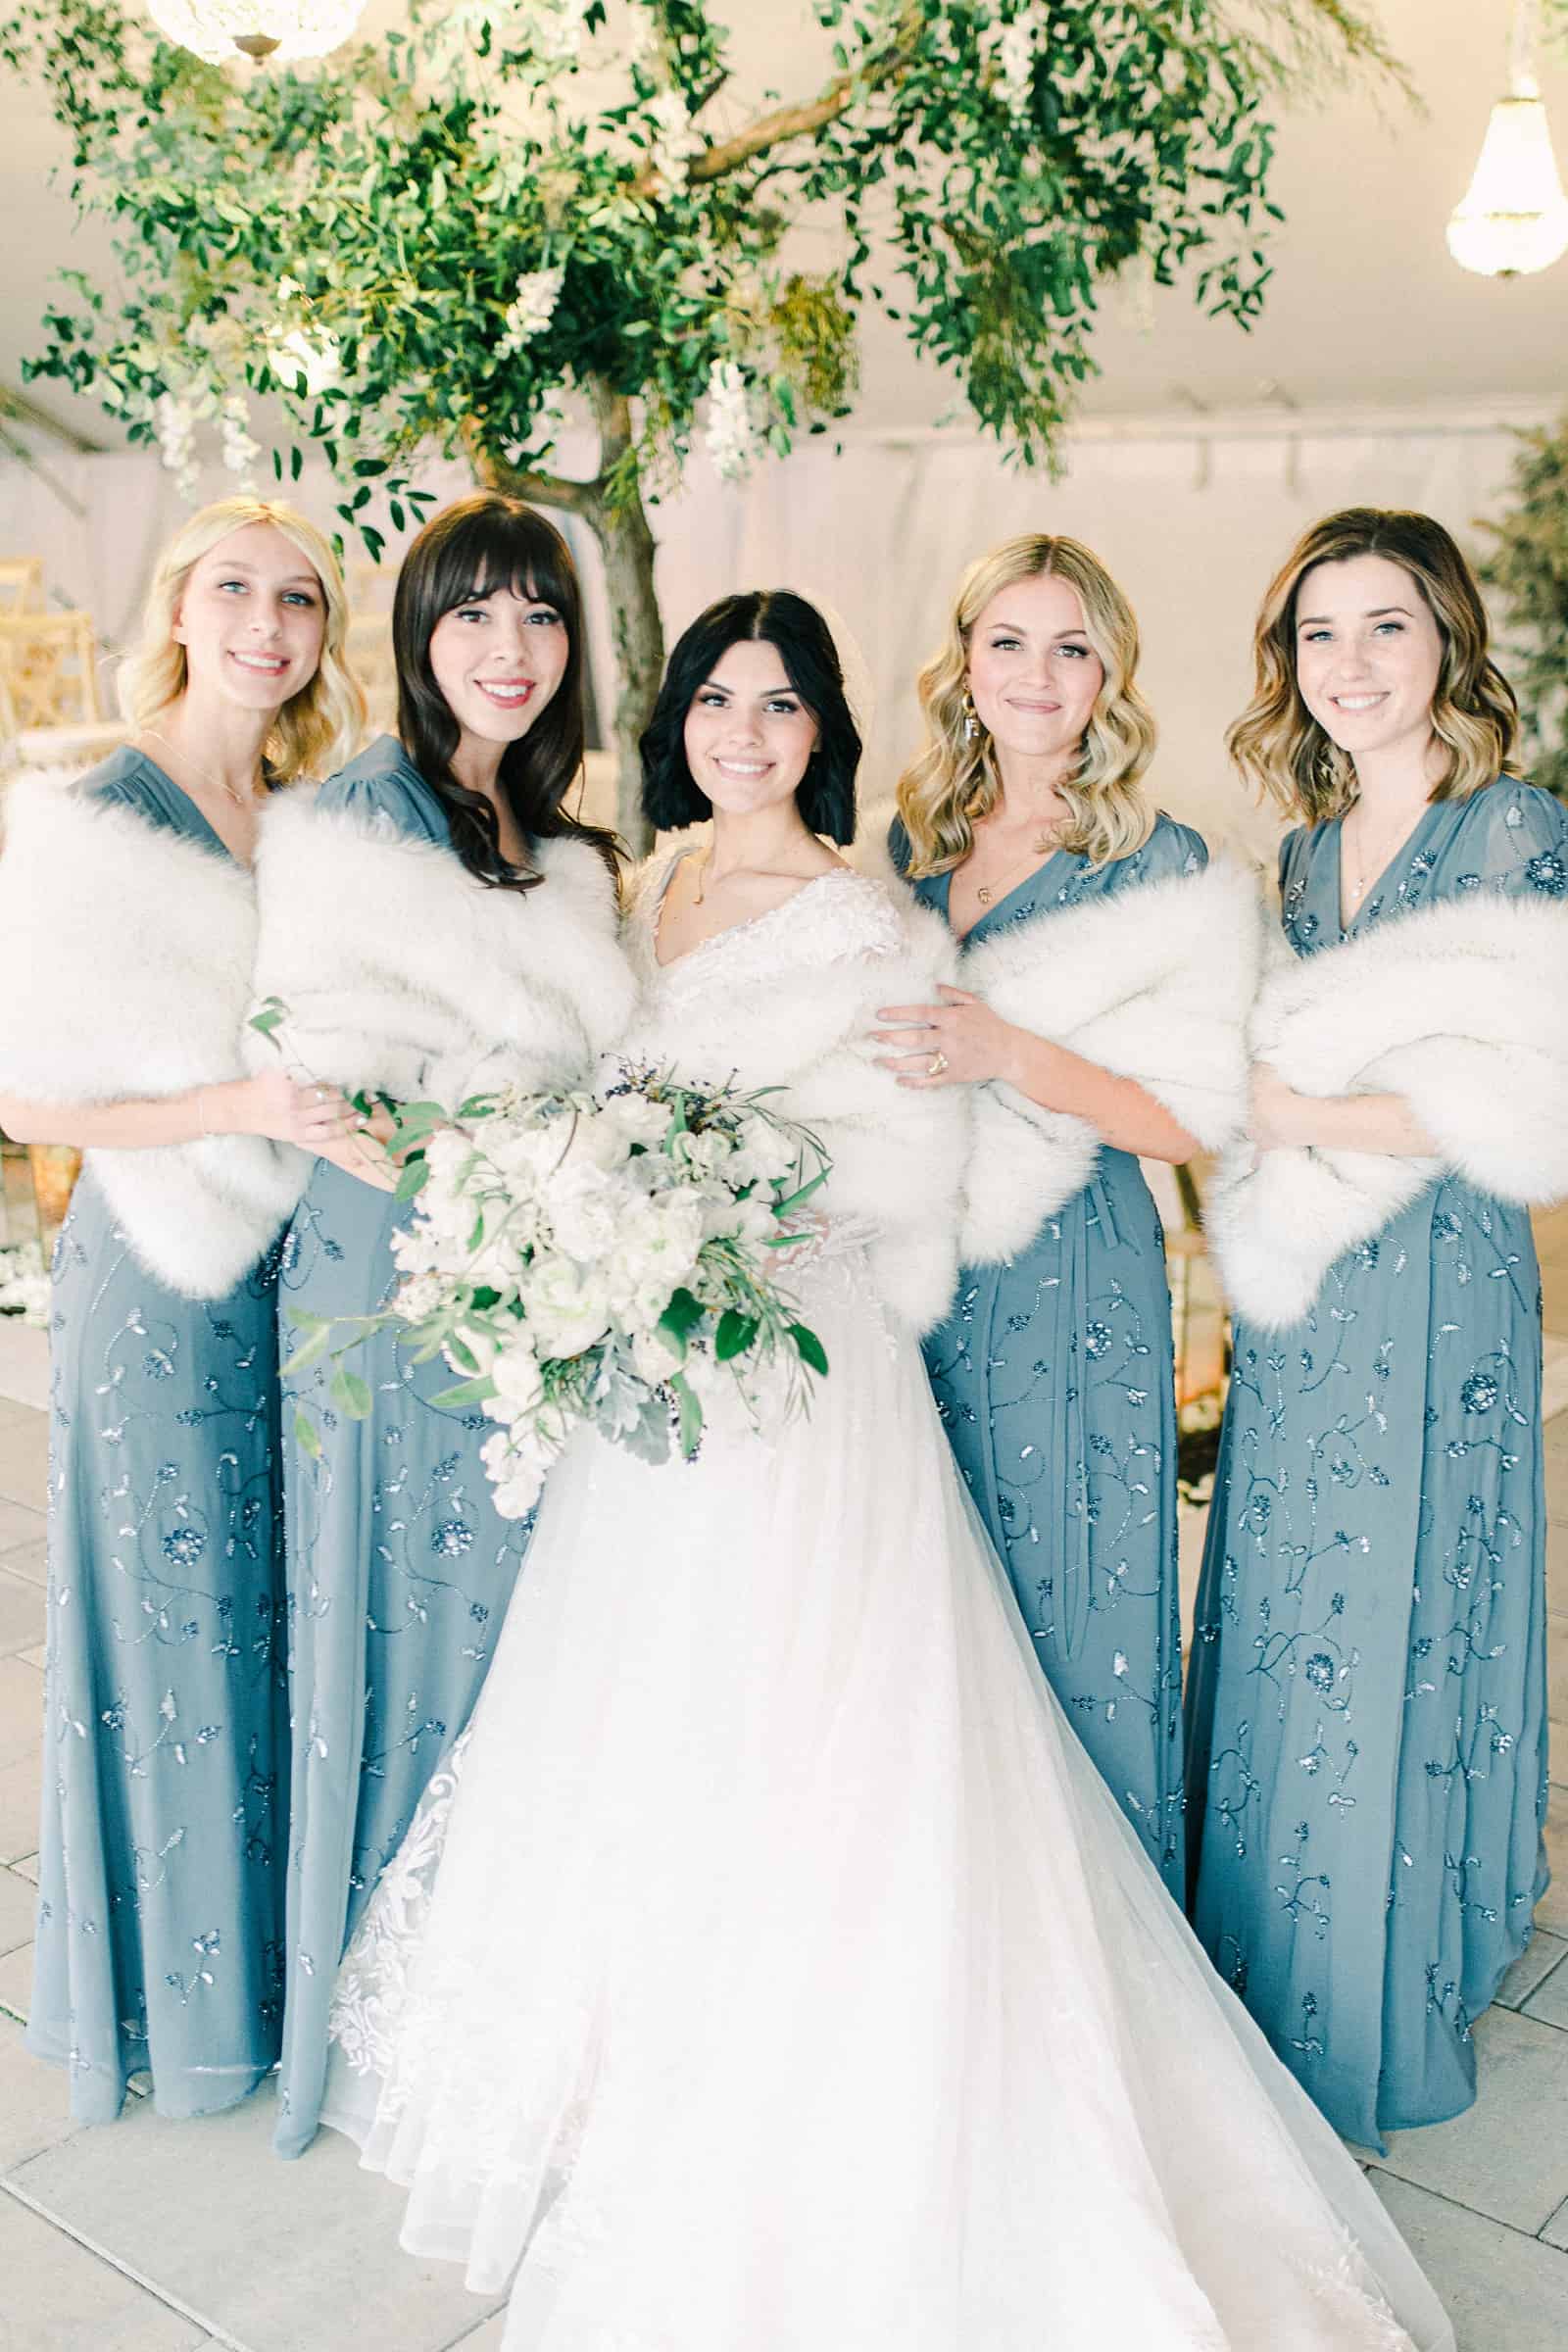 Winter wedding bride with bridesmaids, blue beaded bridesmaids dresses with white fur stoles, white flower bouquets